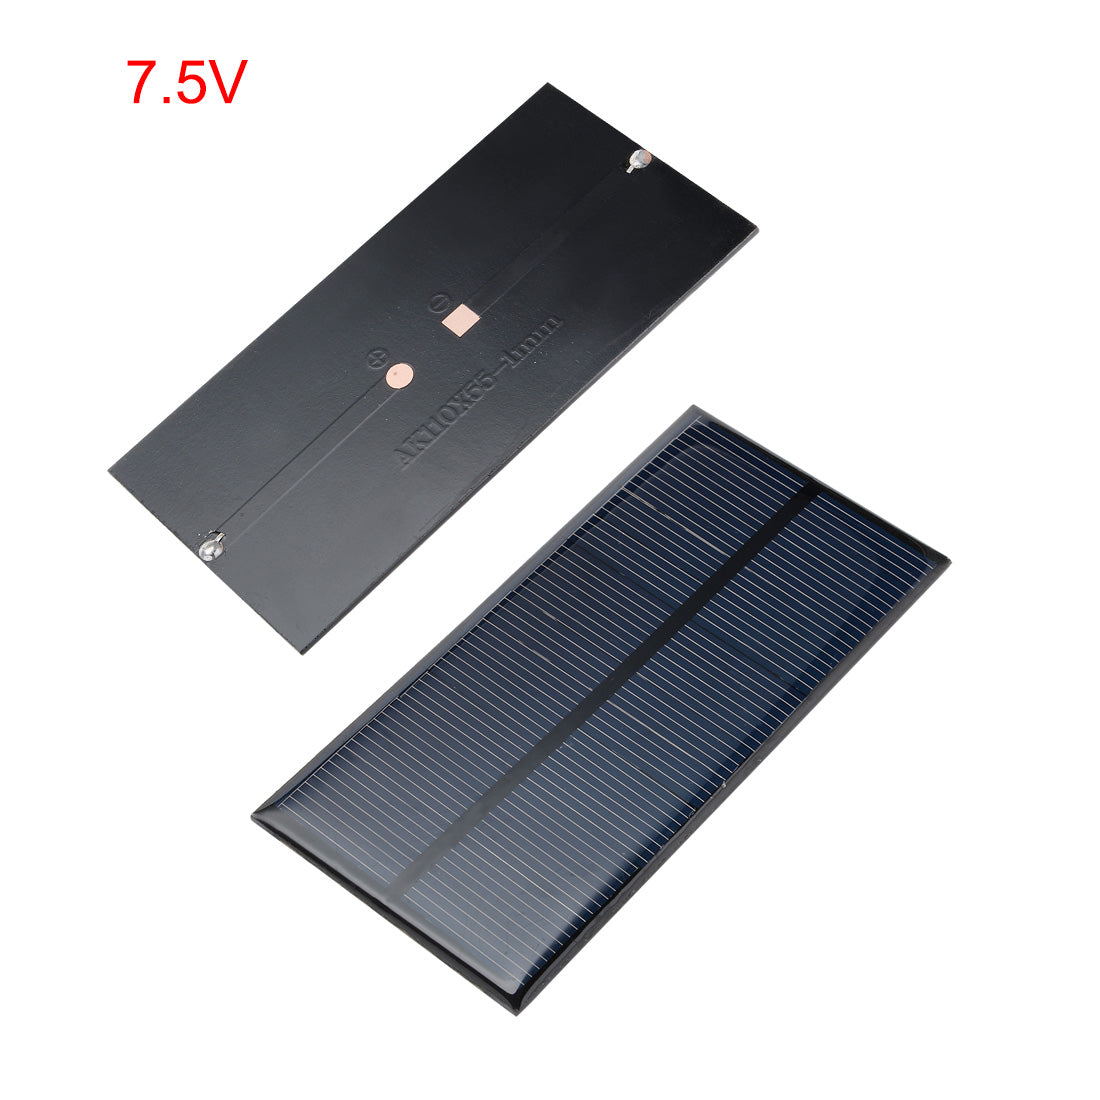 uxcell Uxcell 5Pcs 7.5V 100mA Poly Mini Solar Cell Panel Module DIY for Light Toys Charger 110mm x 55mm